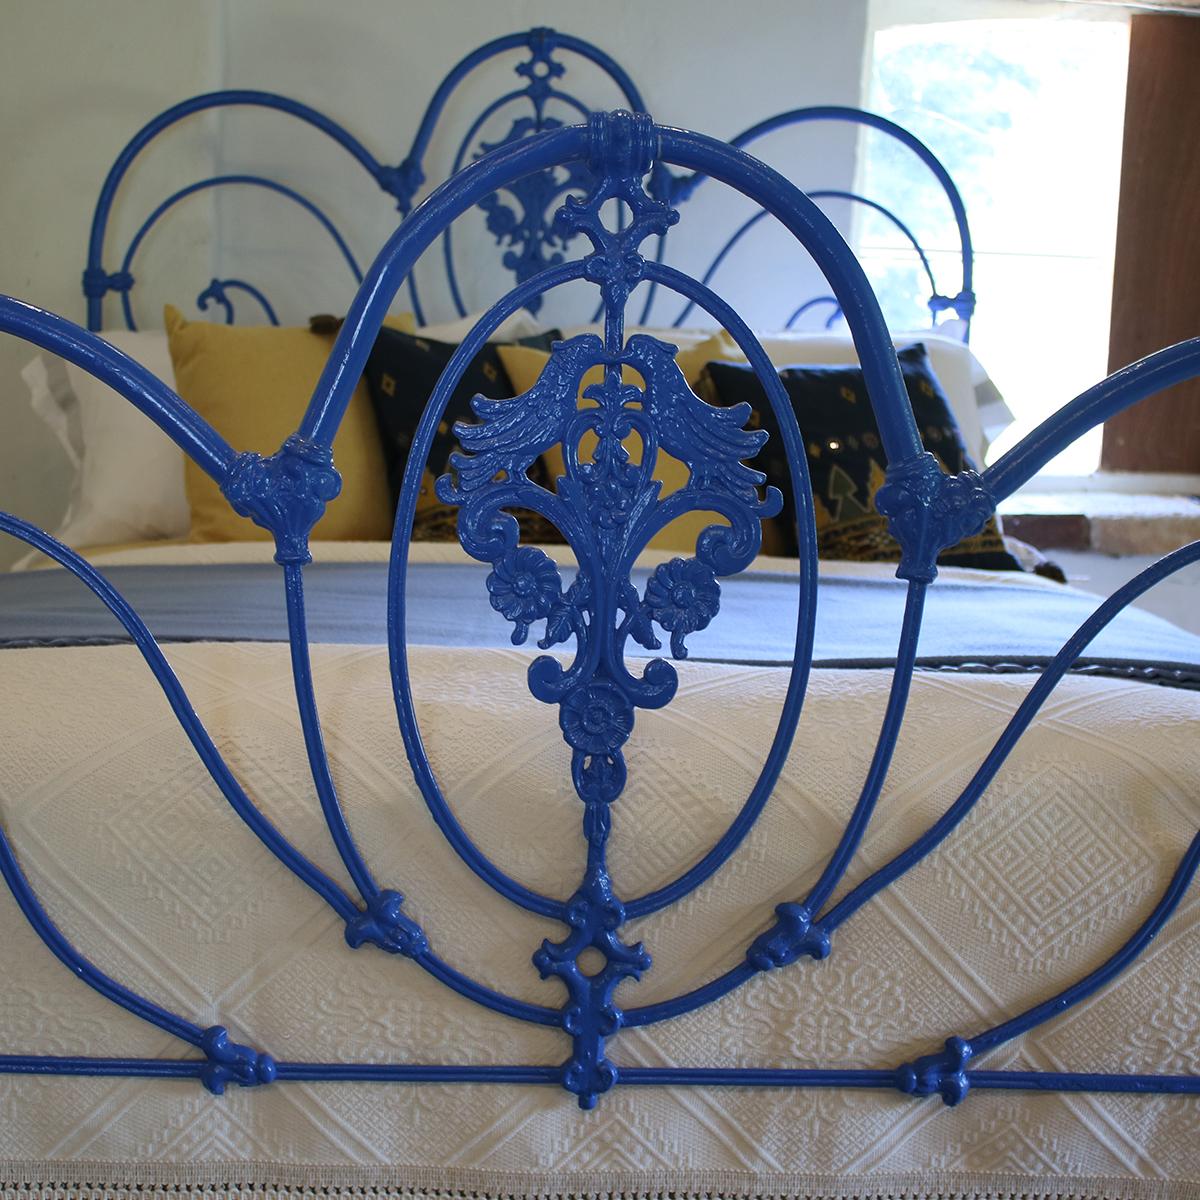 Antique bed with three hoops design design, bird castings and finished in blue. This bed can be repainted in a colour of your choice. 

This bed accepts a UK King size or US Queen size (5ft, 60 inches or 150 cm wide) base and mattress set.

The